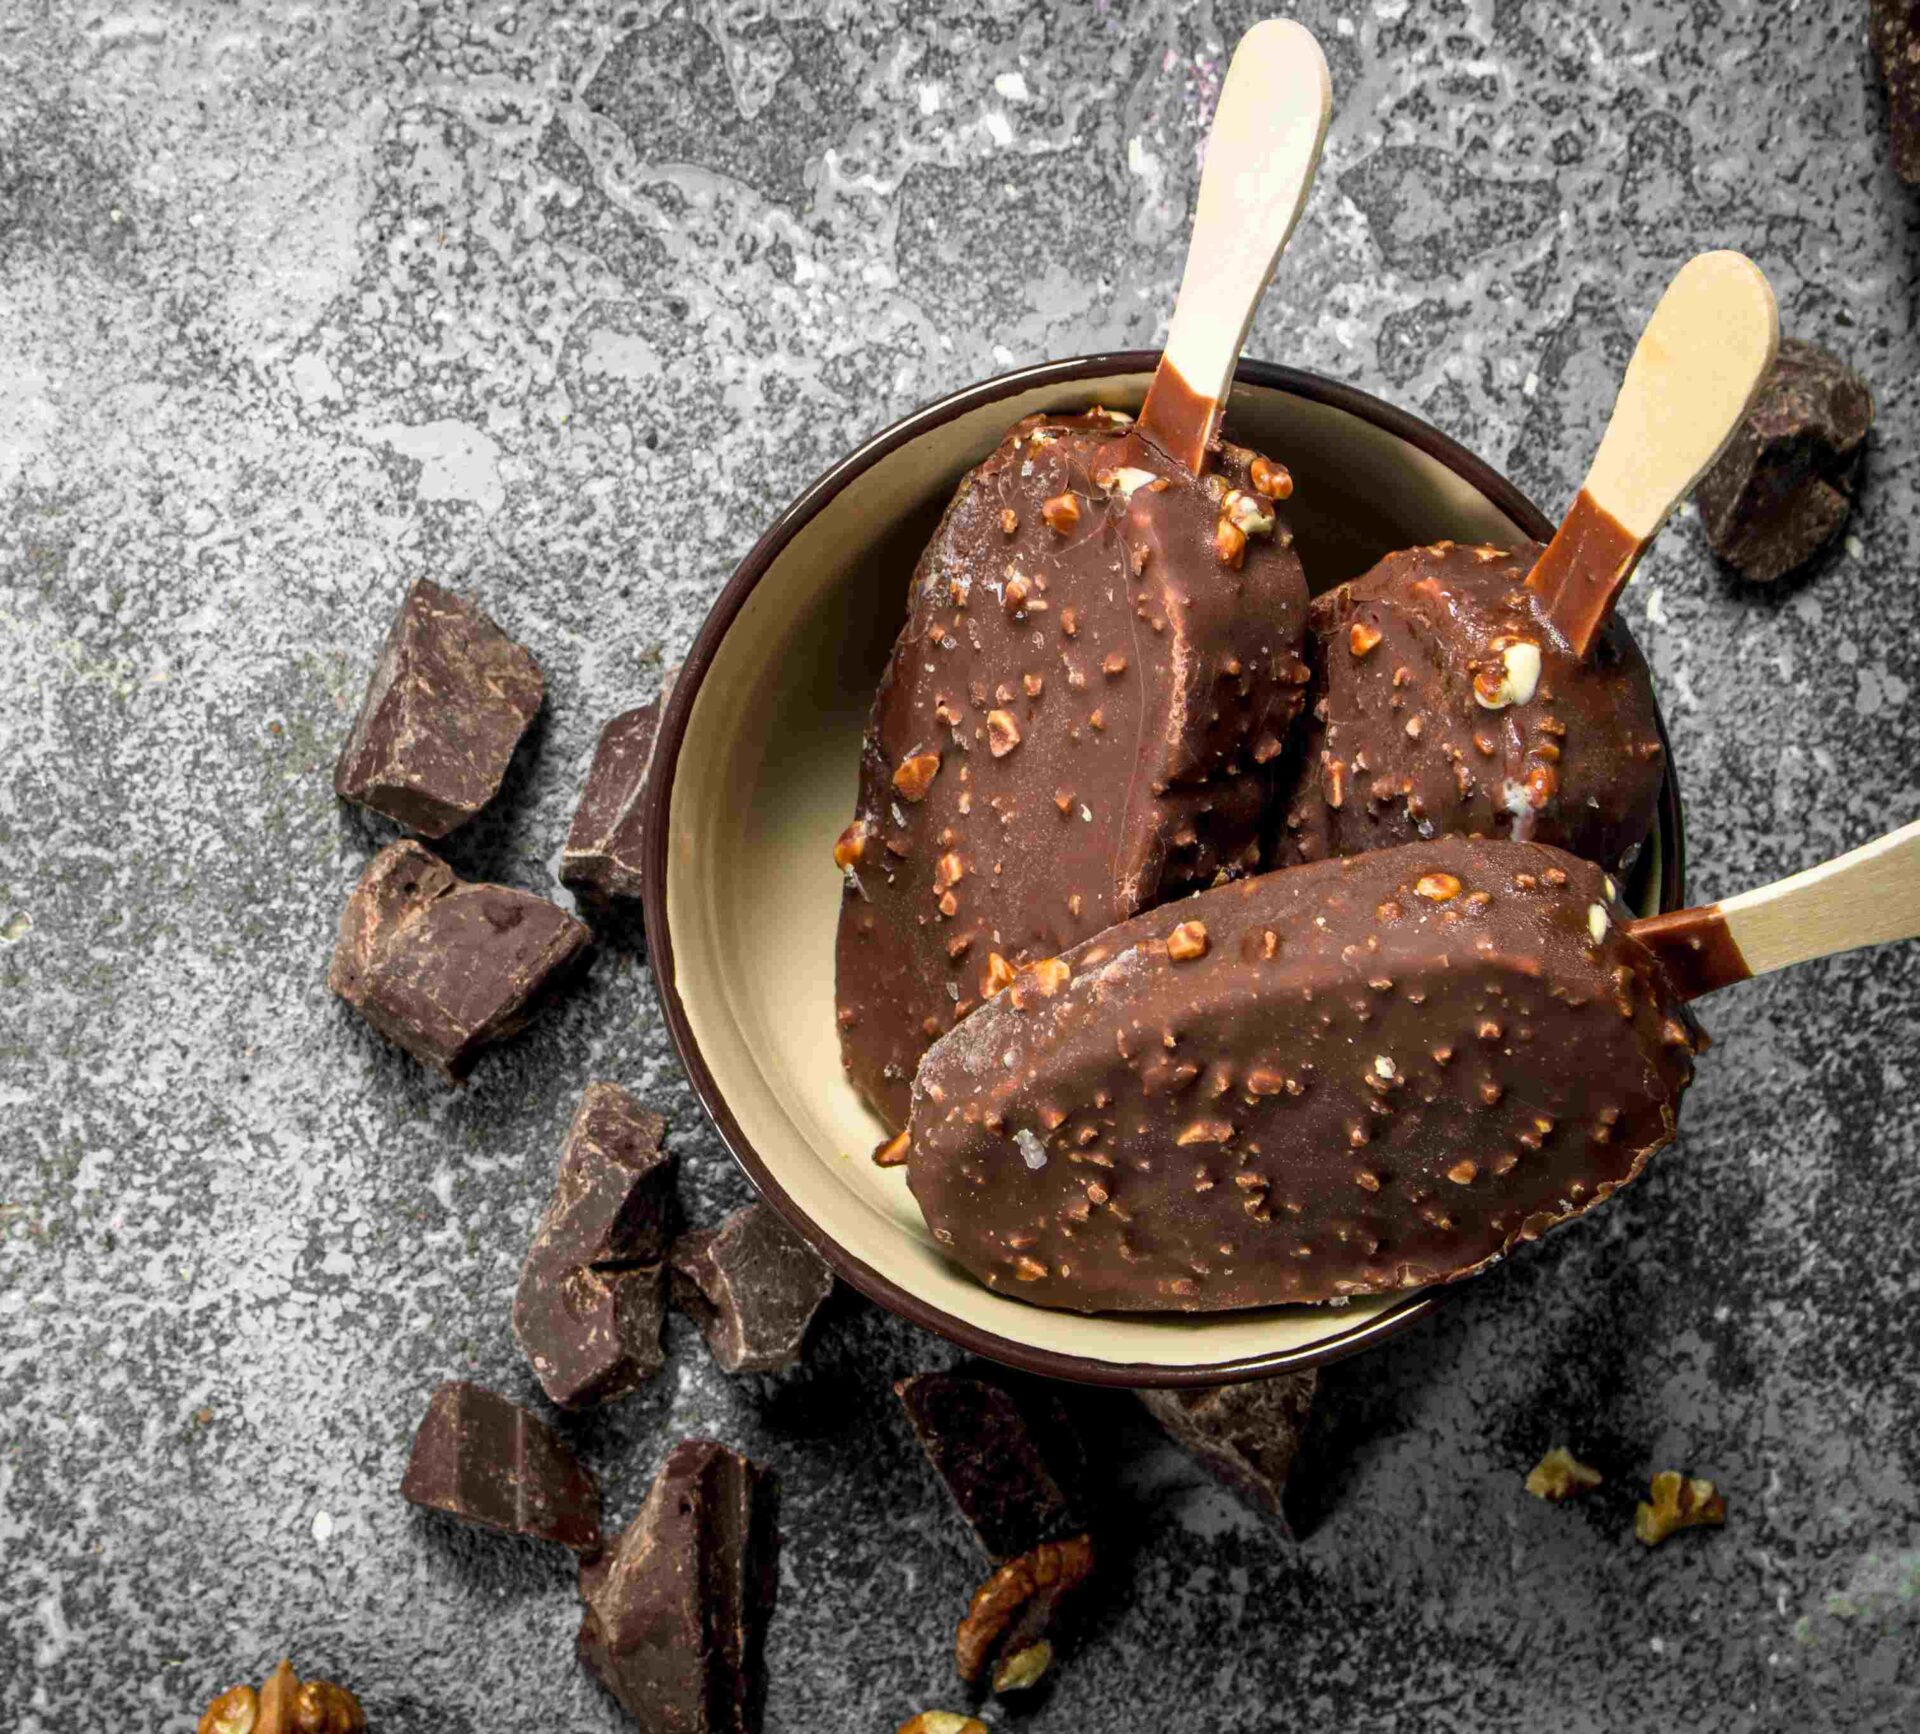 Bowl of Chocolate Covered Ice Cream Bars with Diced Almonds